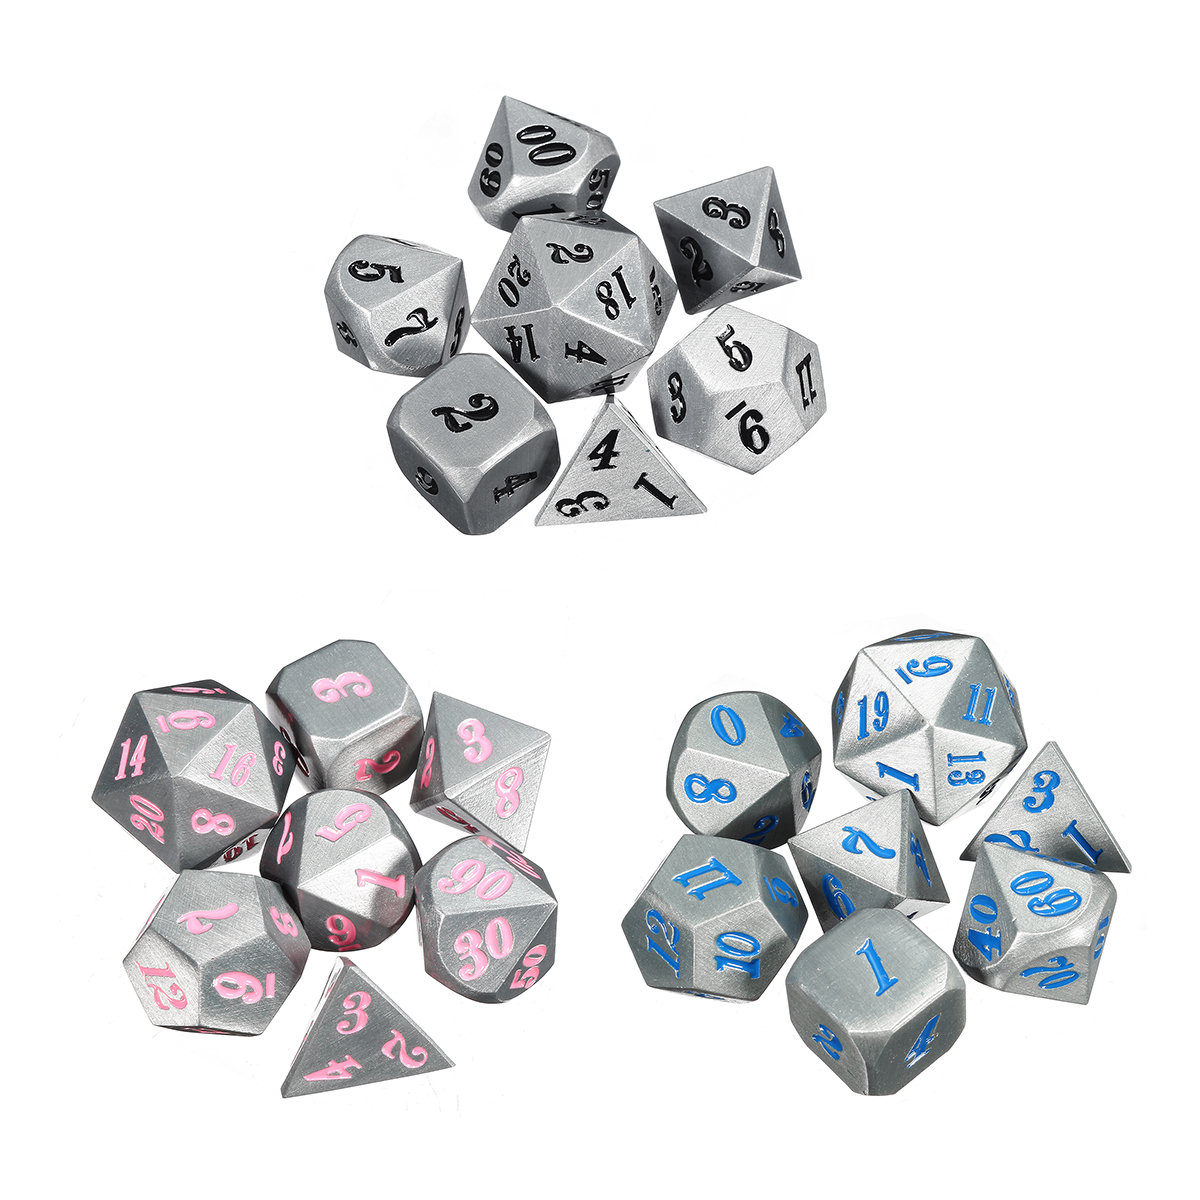 7Pc-Solid-Metal-Heavy-Dice-Set-Polyhedral-Dices-Role-Playing-Games-Dice-Gadget-RPG-1391316-1